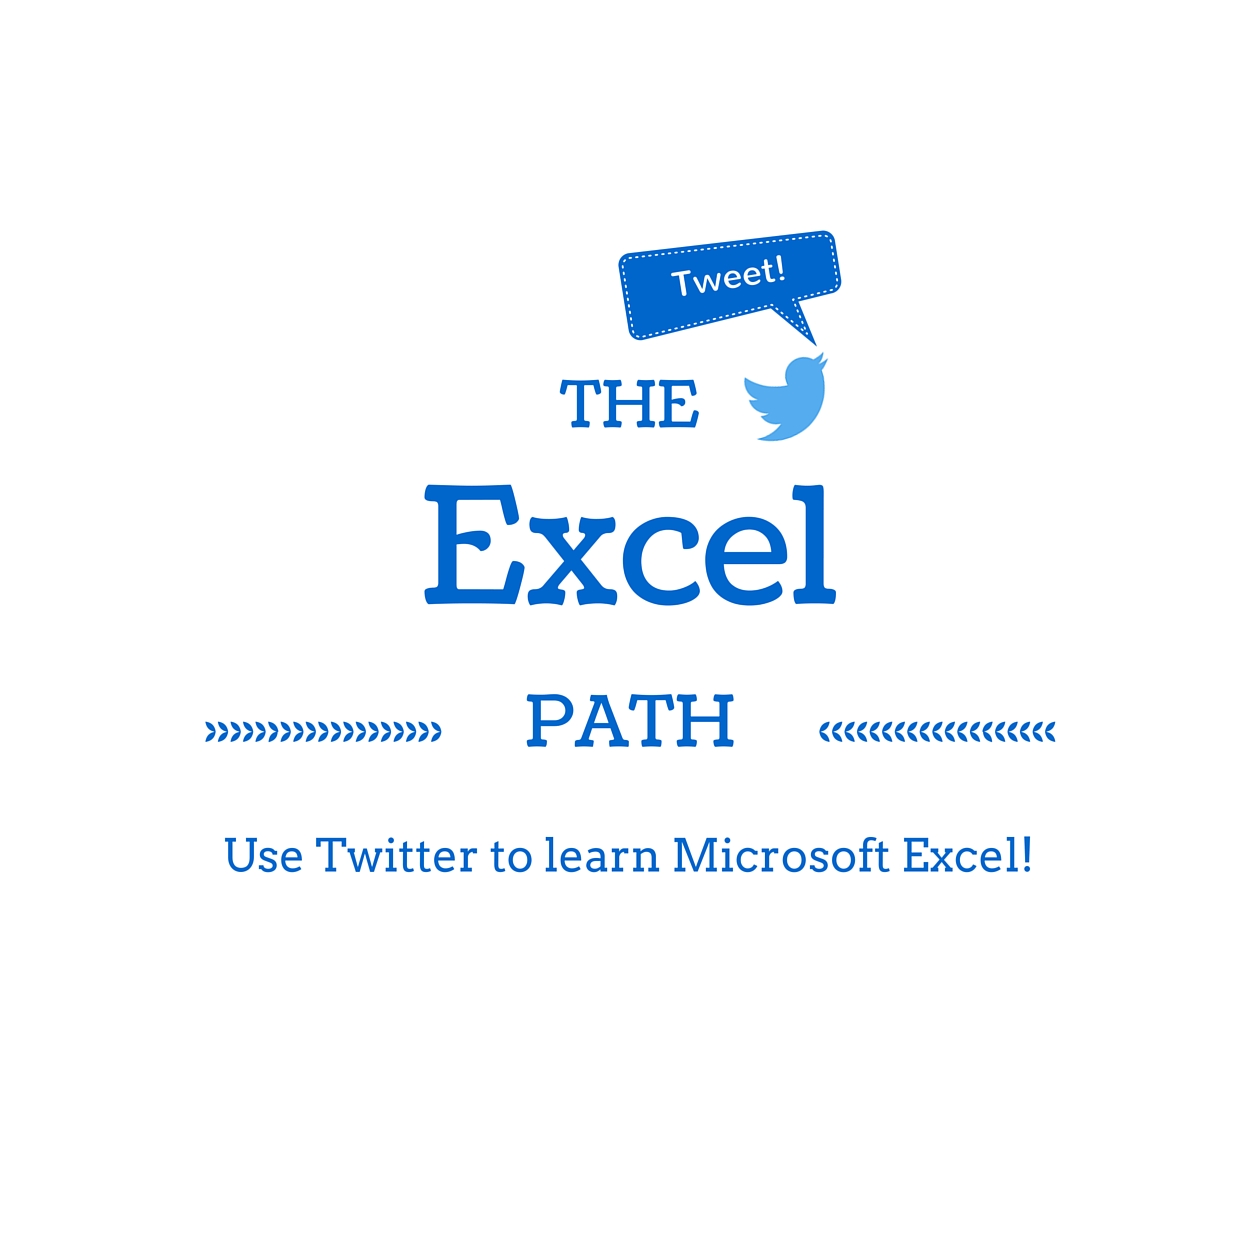 Learn Microsoft Excel with Twitter!